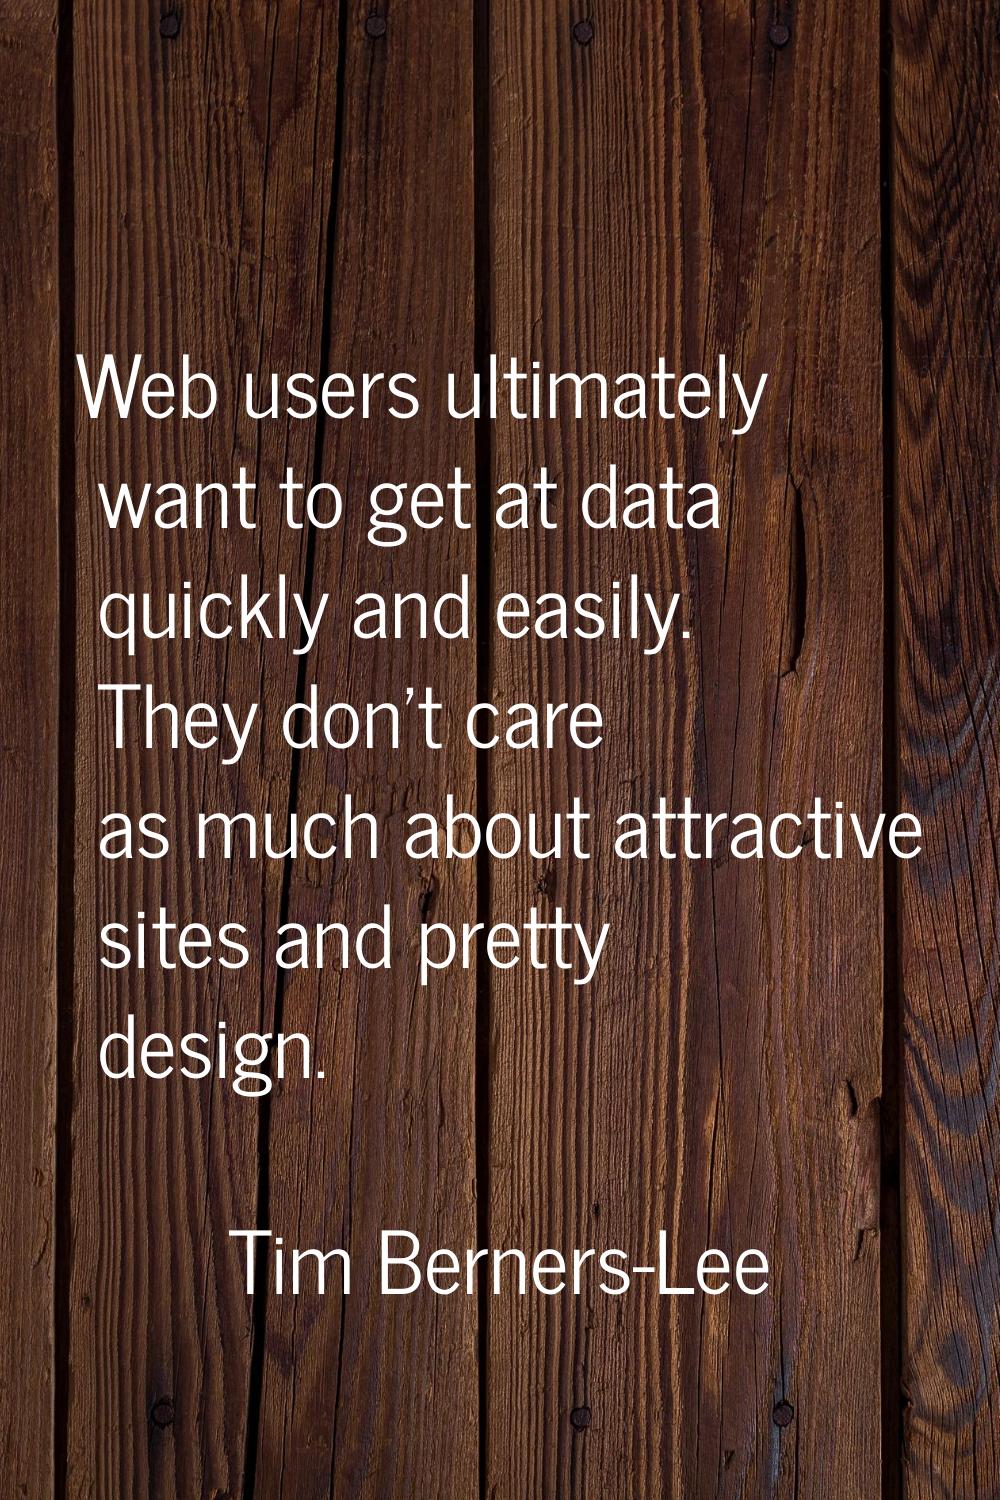 Web users ultimately want to get at data quickly and easily. They don't care as much about attracti